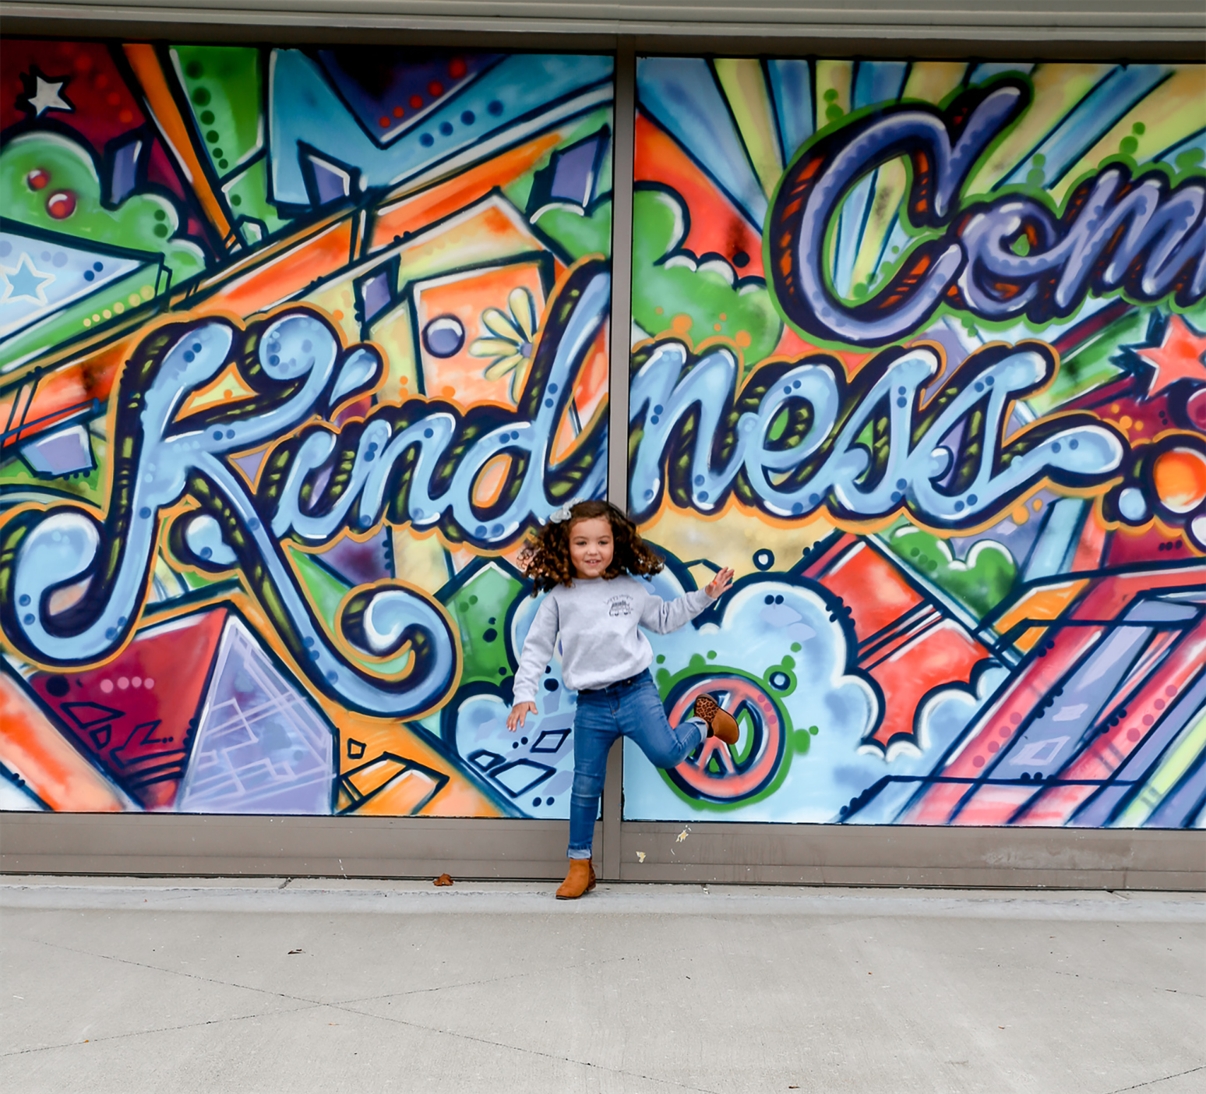 If you can be anything, be kind! RPT partnered with a local Ohio artist to brighten up Deerfield Towne Center with this kindness mural.